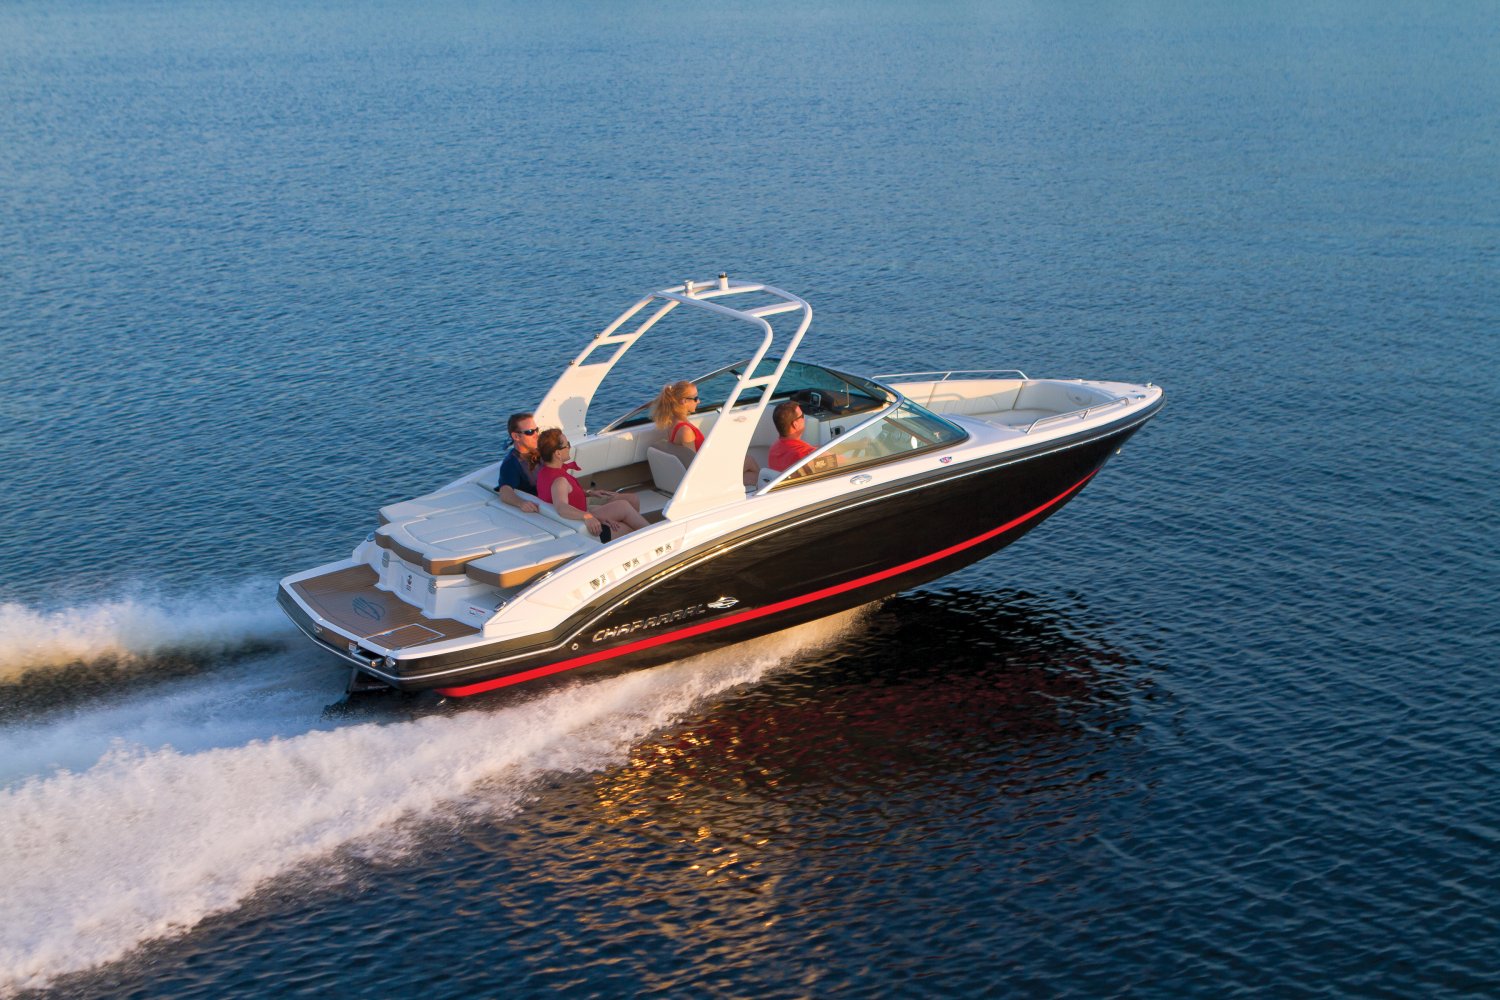 The Chaparral 227 SSX is as equally capable as a watersport boat and as a family fun platform. Chaparral photo.